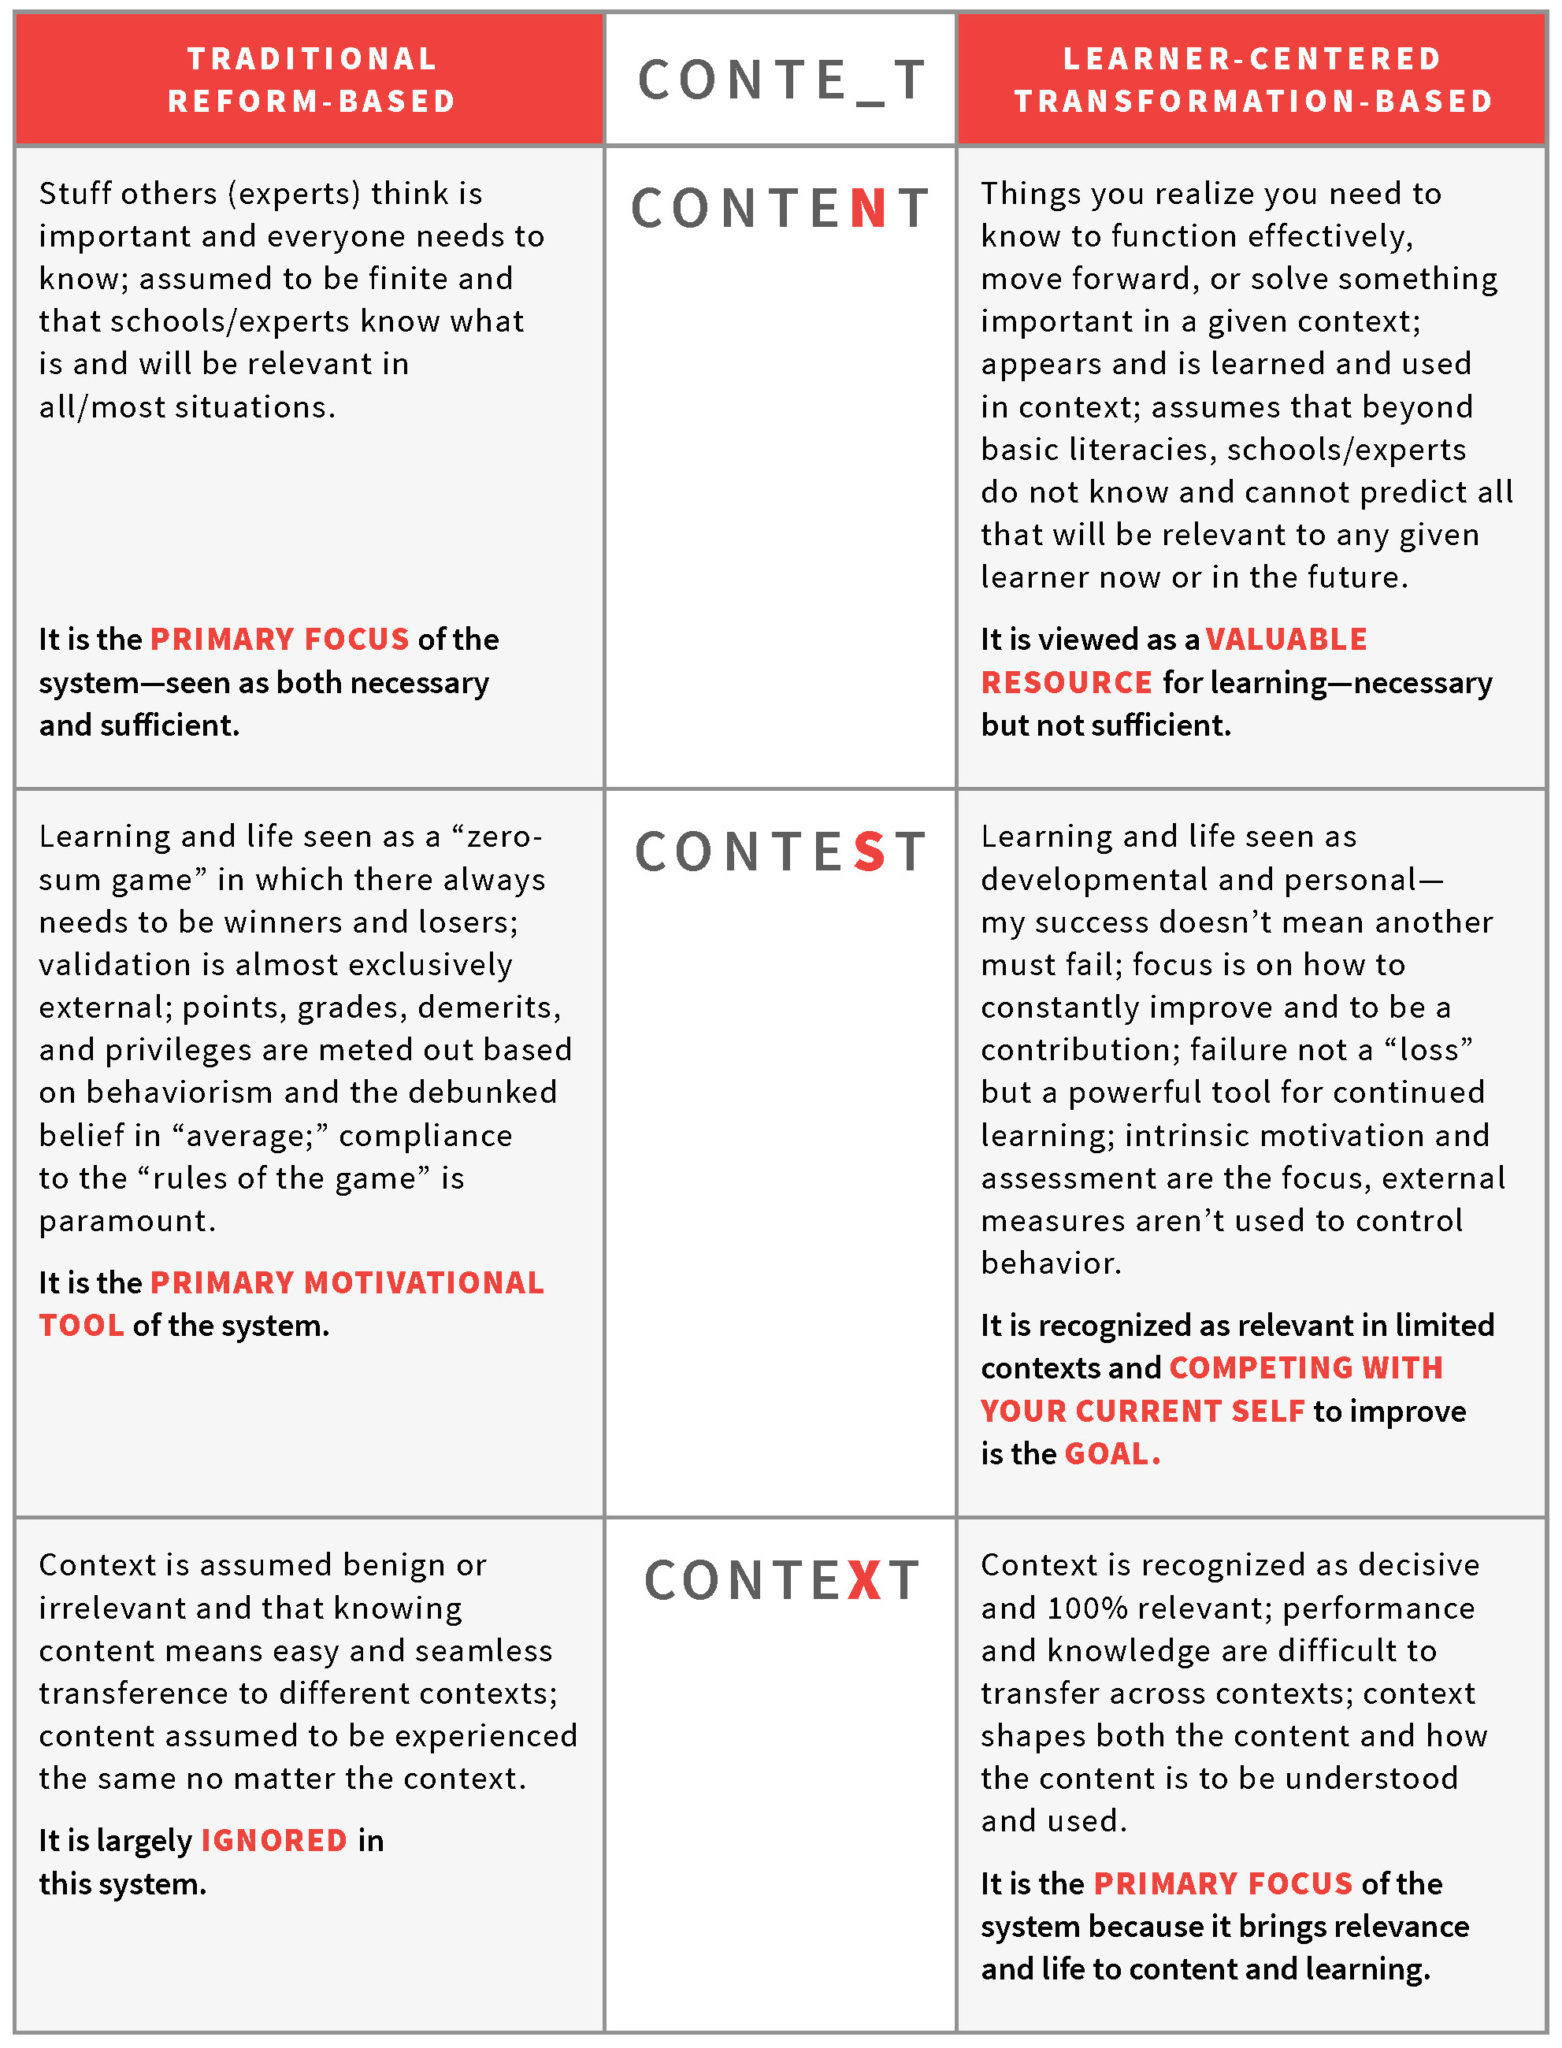 Table comparing the difference between content, contest, and context between the school-centered and learner-centered paradigms of education